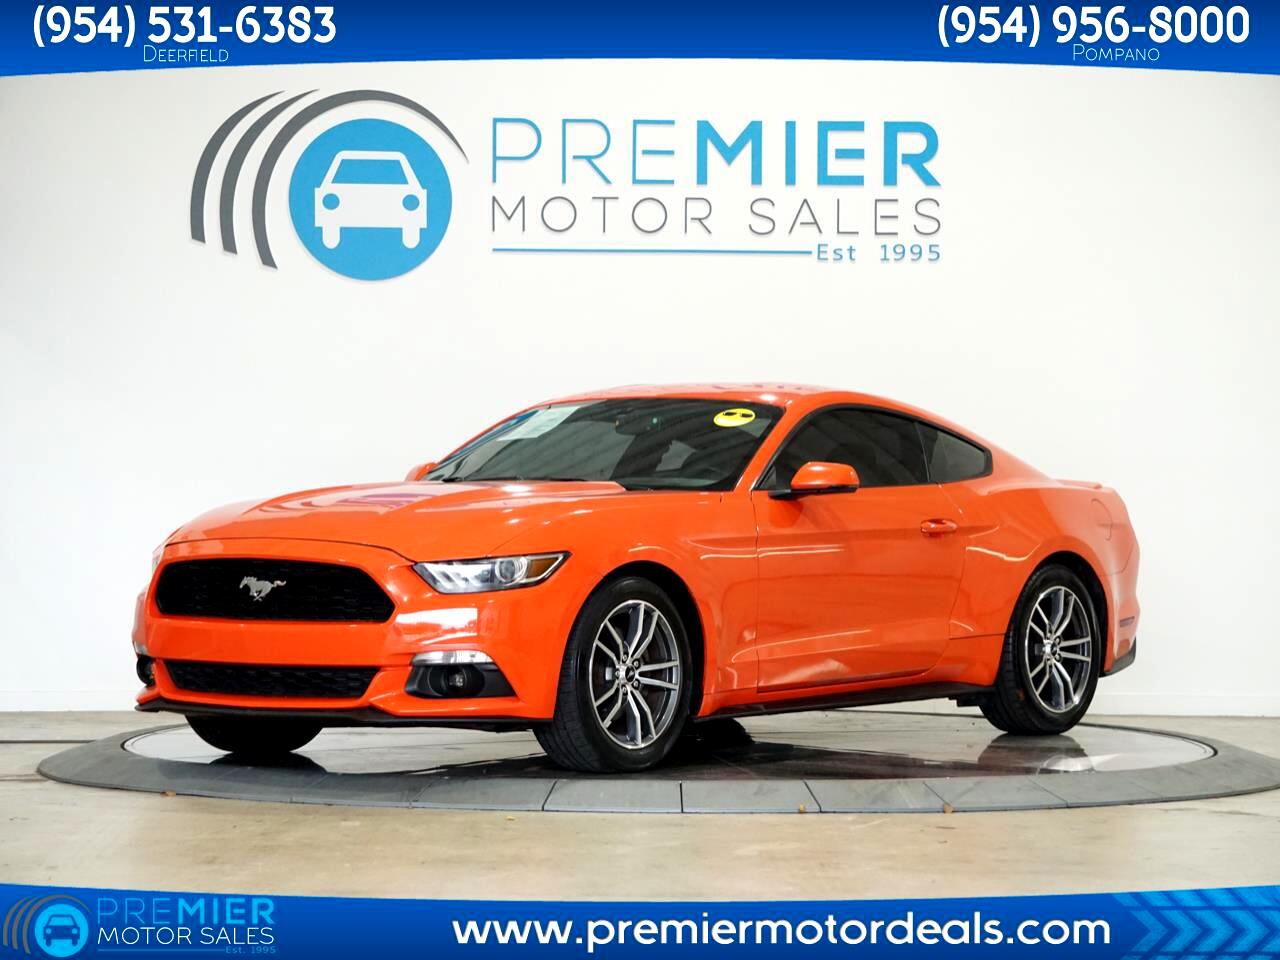 Ford Mustang EcoBoost Coupe 2015